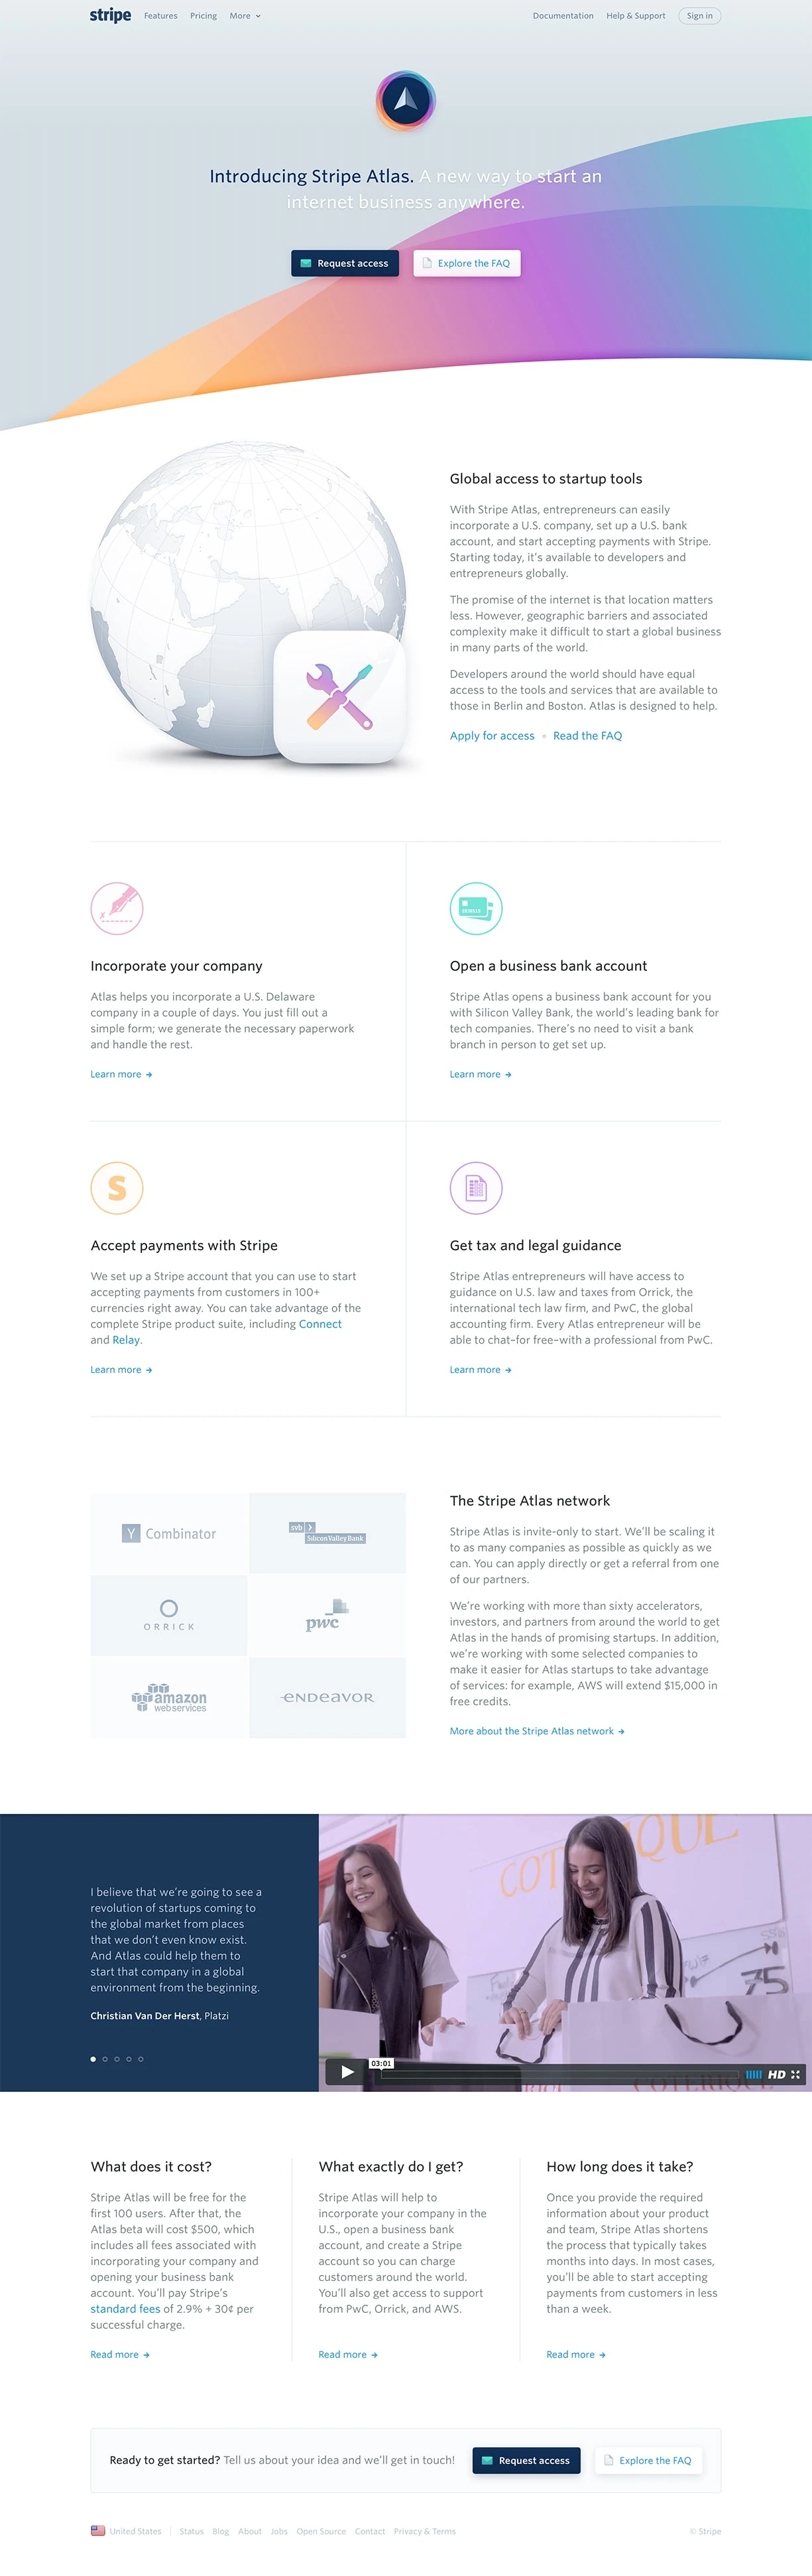 Stripe Atlas Landing Page Example: A new way to start an internet business anywhere.